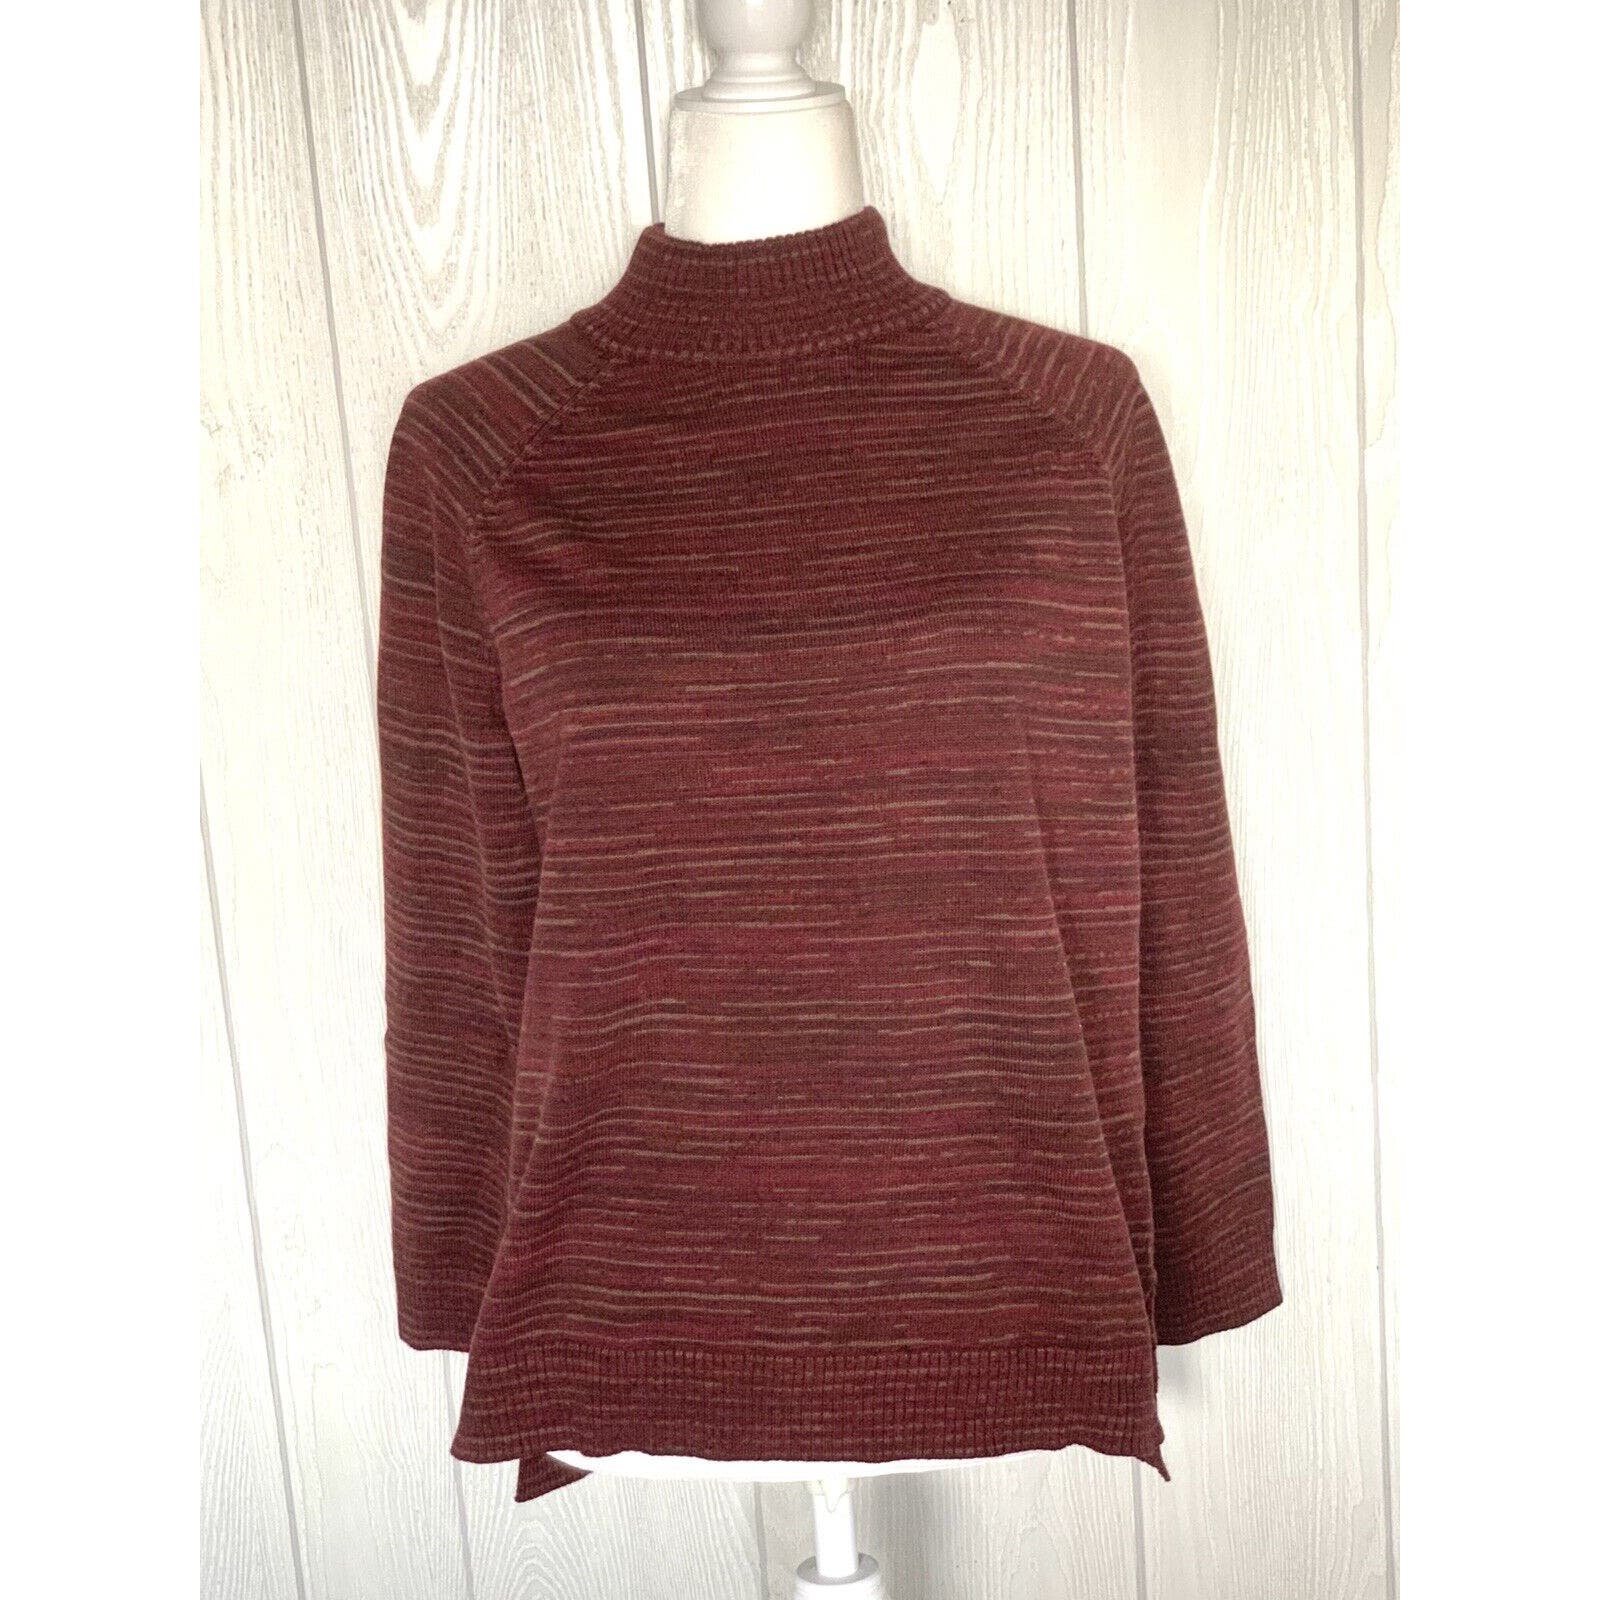 Great Eight Eight Eight Burgandy Stripe Mock Neck Sweater Size Small GSBBpfVAg on sale